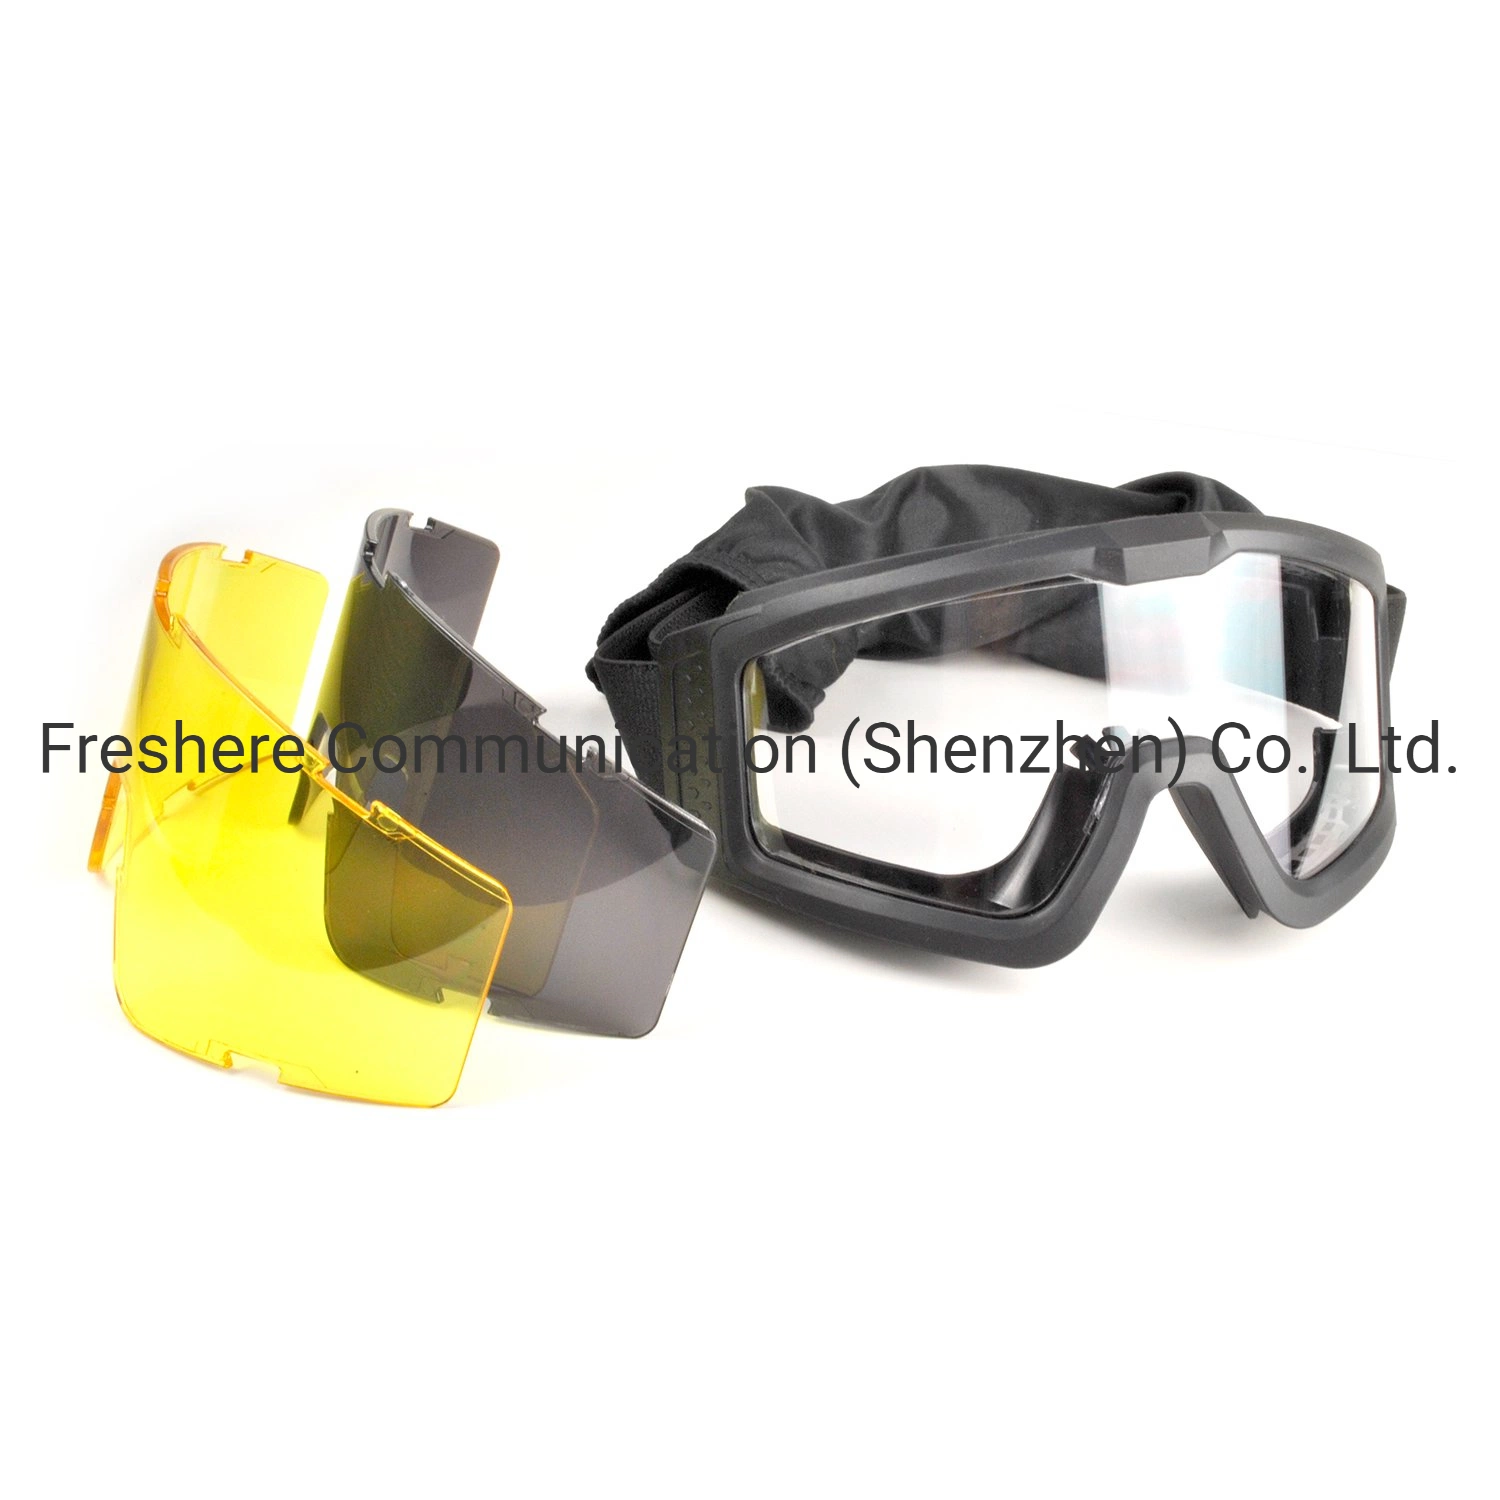 Motorcycles Glasses Sports Goggles Safety Goggle Tactical Safety Goggles Anti Fog Glasses Wholesale Price